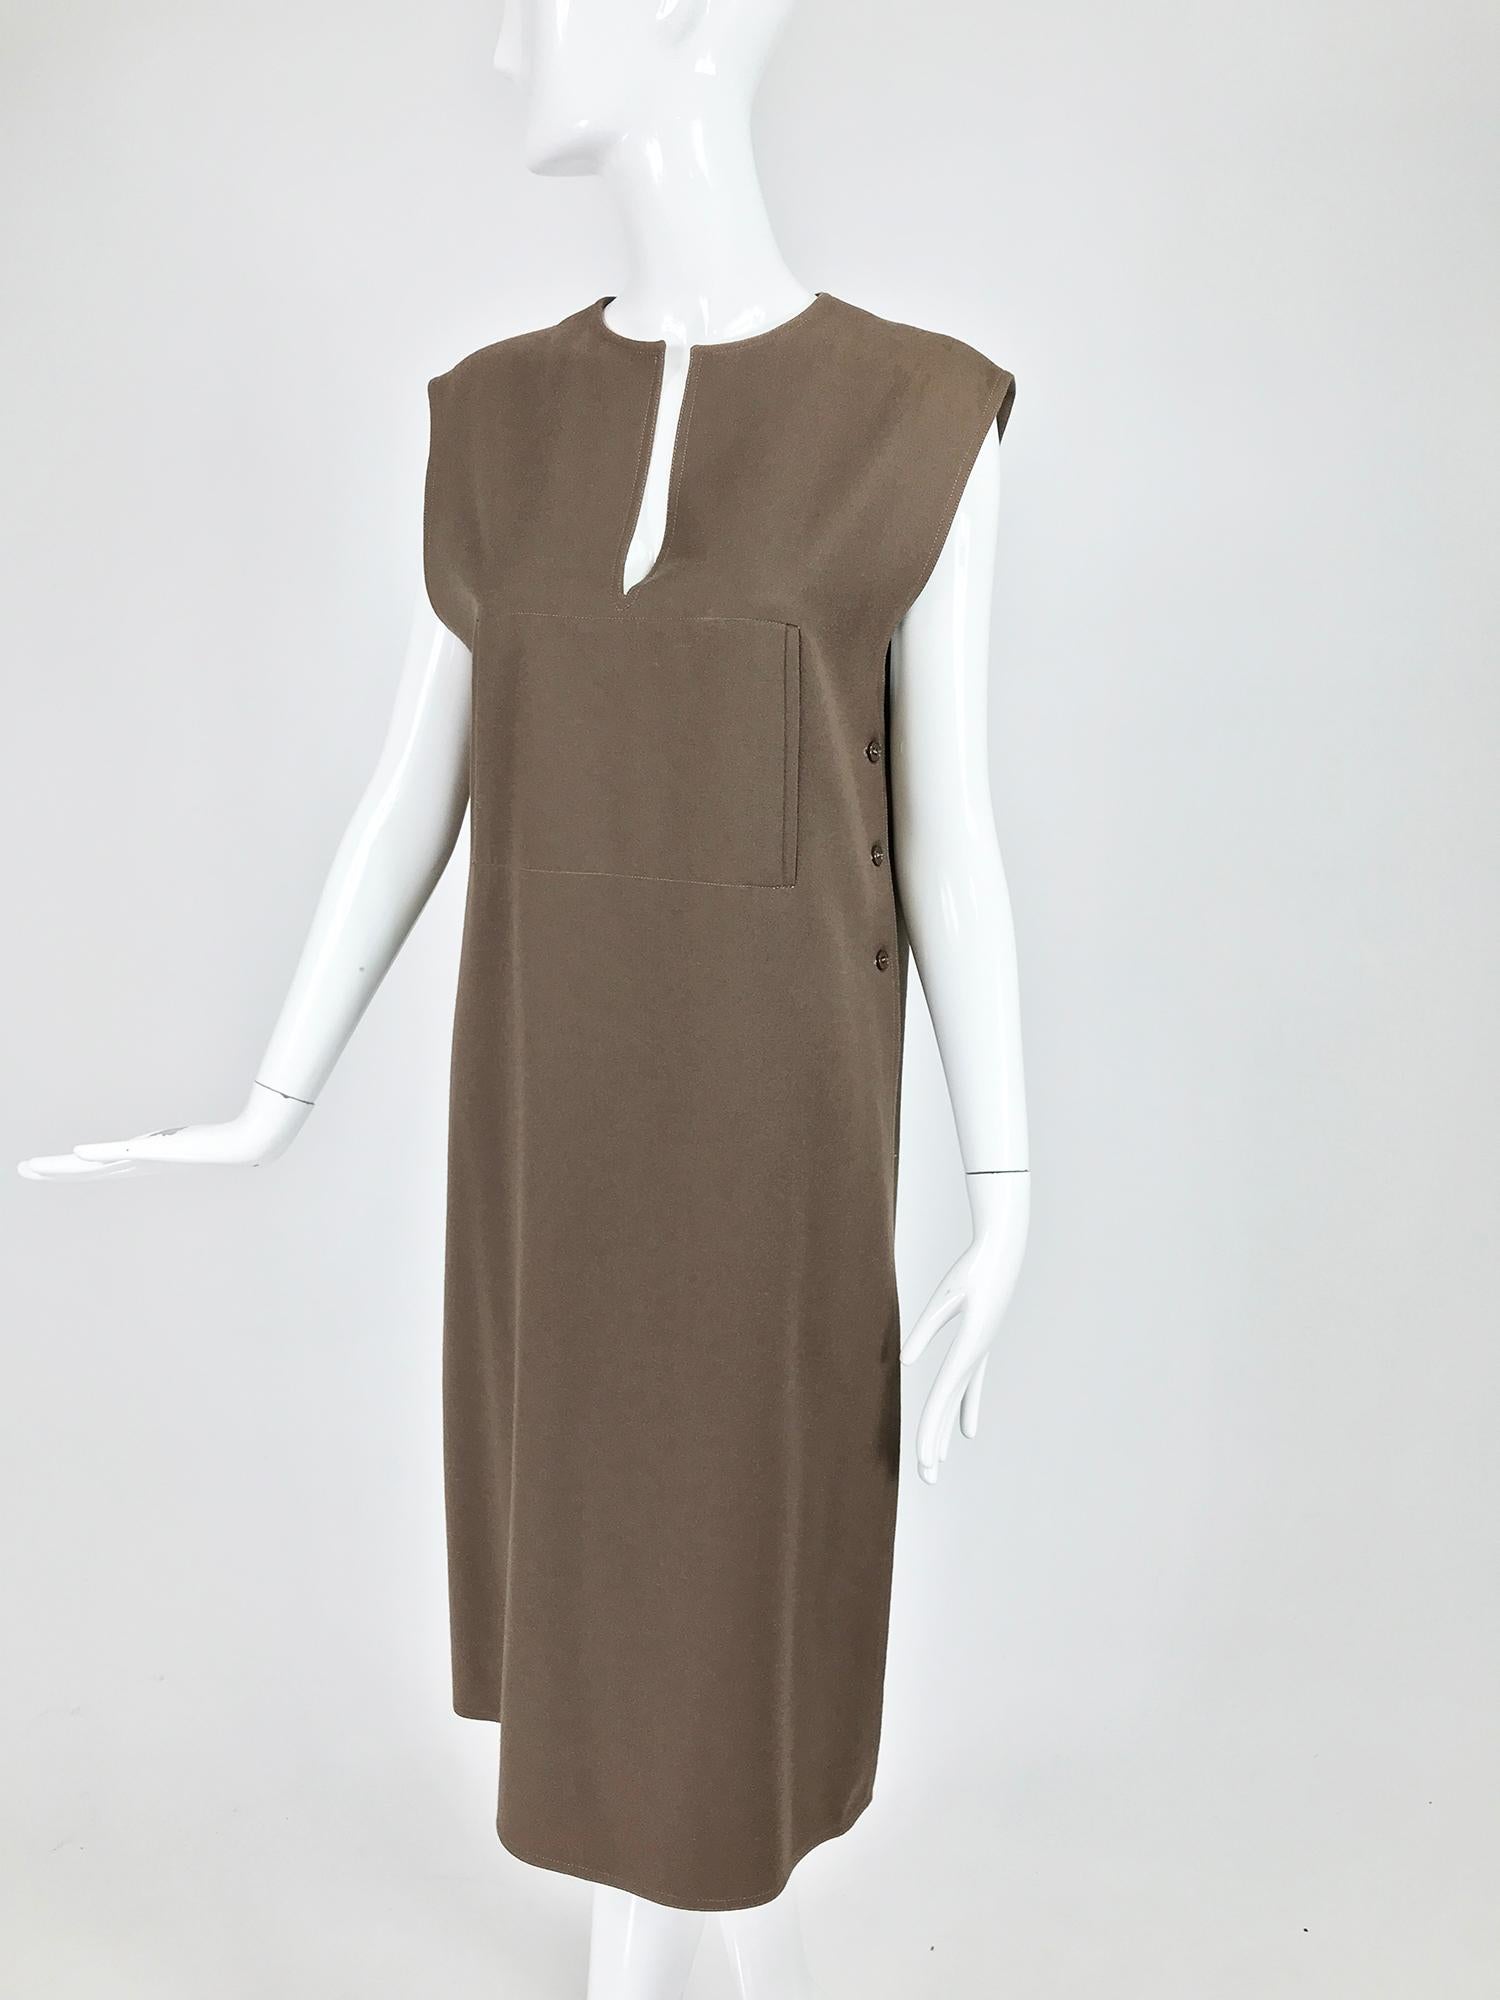 Guy Laroche ready to wear label, chocolate brown double face wool tunic dress from the 1960s.  Unique dress/tunic was originally meant to be worn over a sweater or shirt. This piece has a round neckline with a front vent. The shoulder is extended.